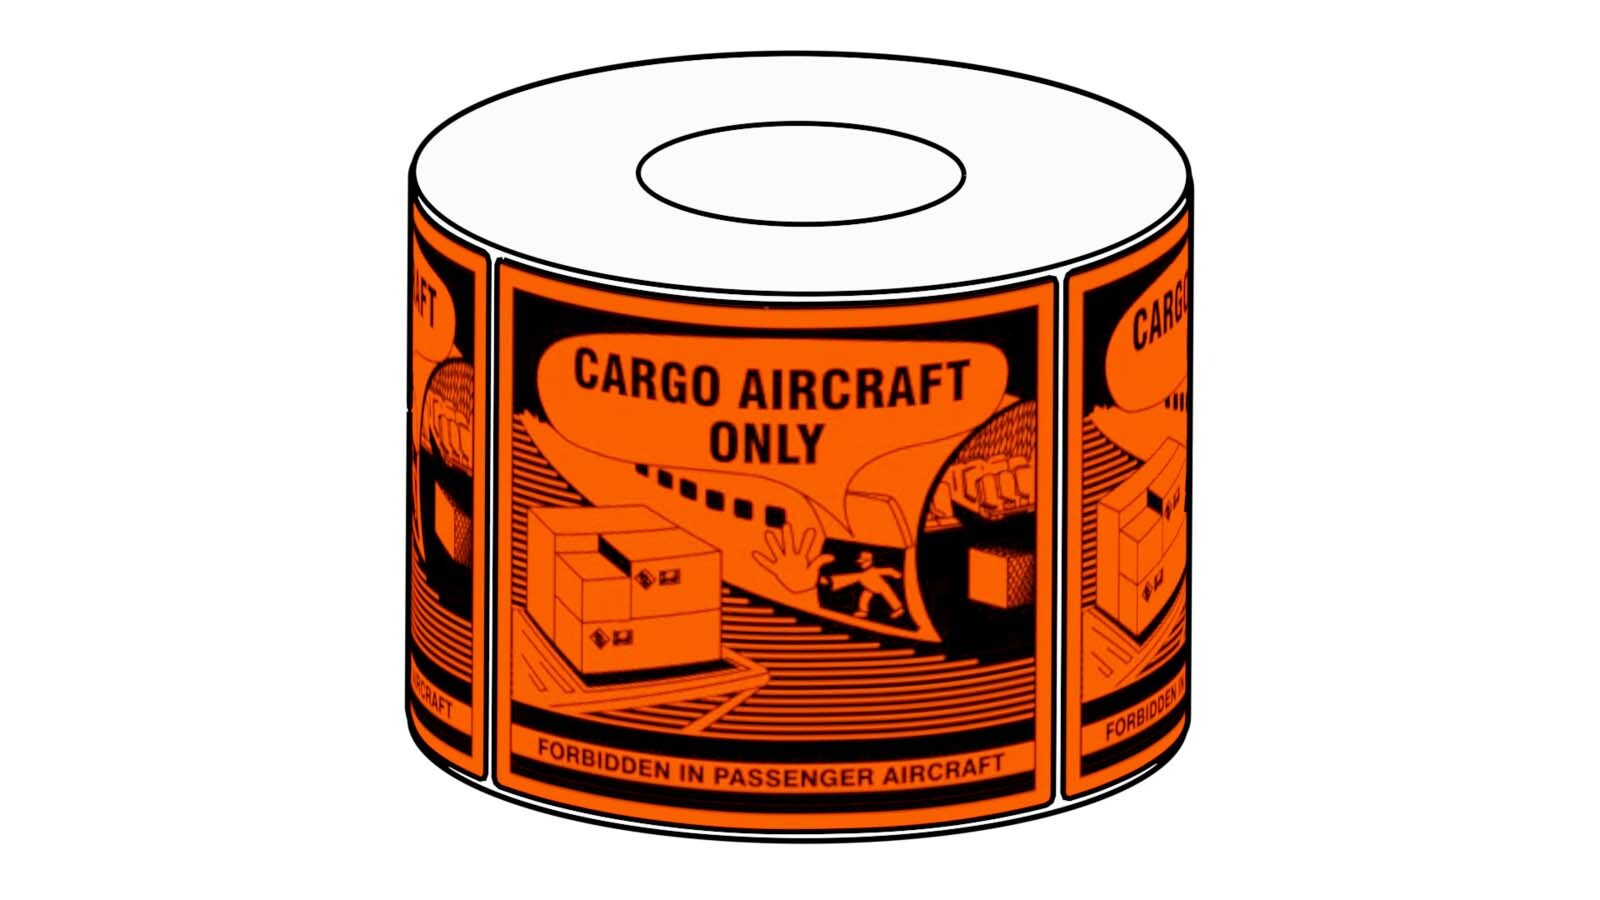 111x126mm Cargo Aircraft Only Label, 500 per roll